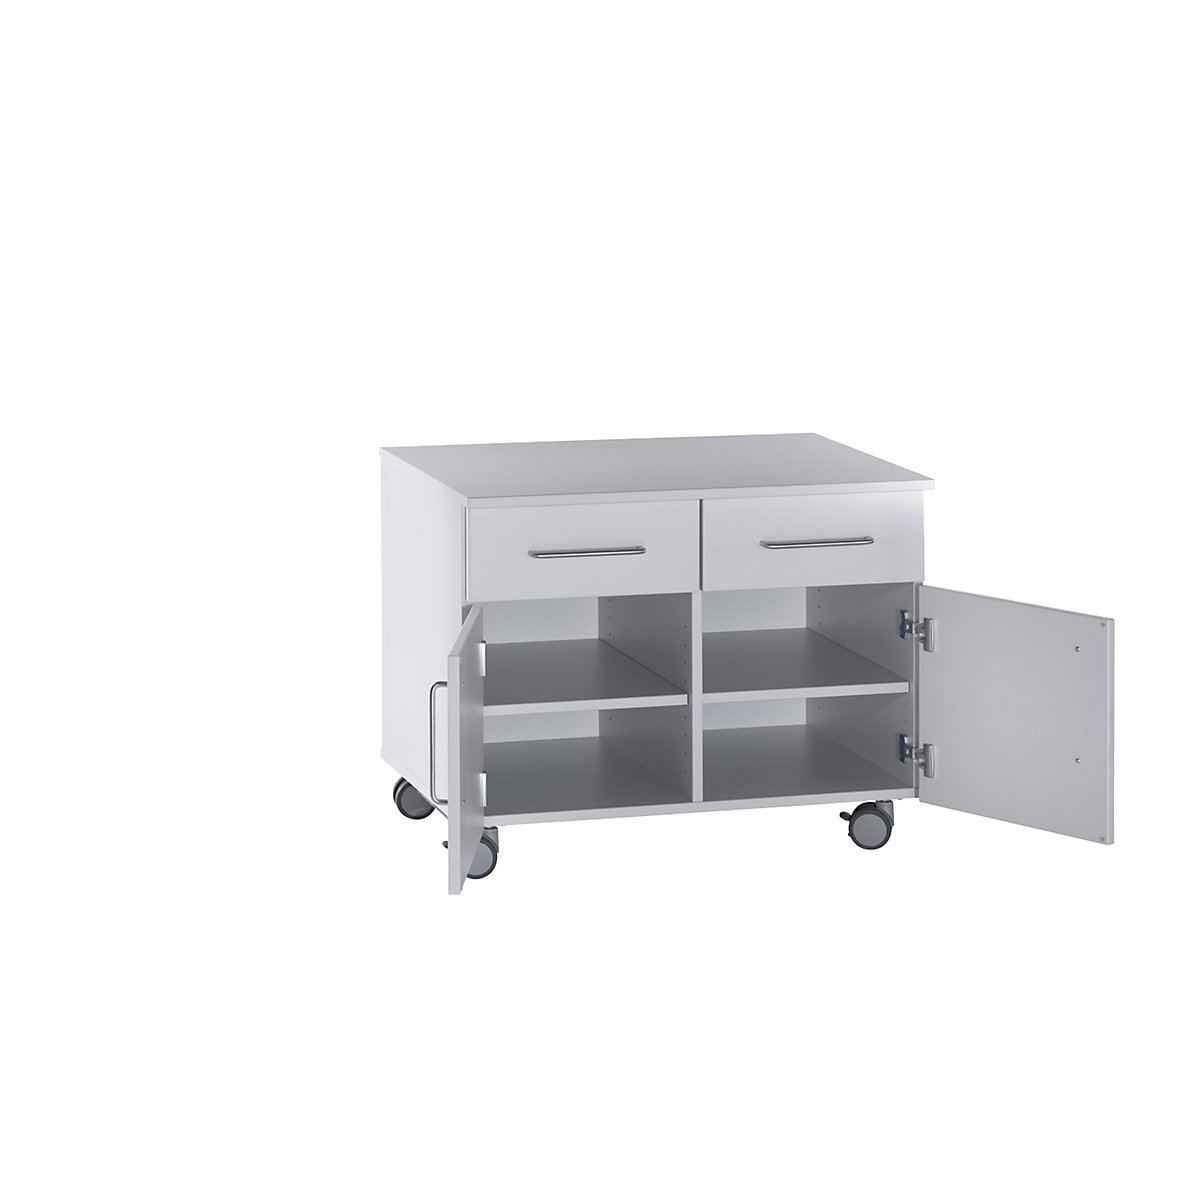 Laboratory base cupboard, low, 2 drawers, 2 doors, 2 shelves, 1 central partition, width 1136 mm-4